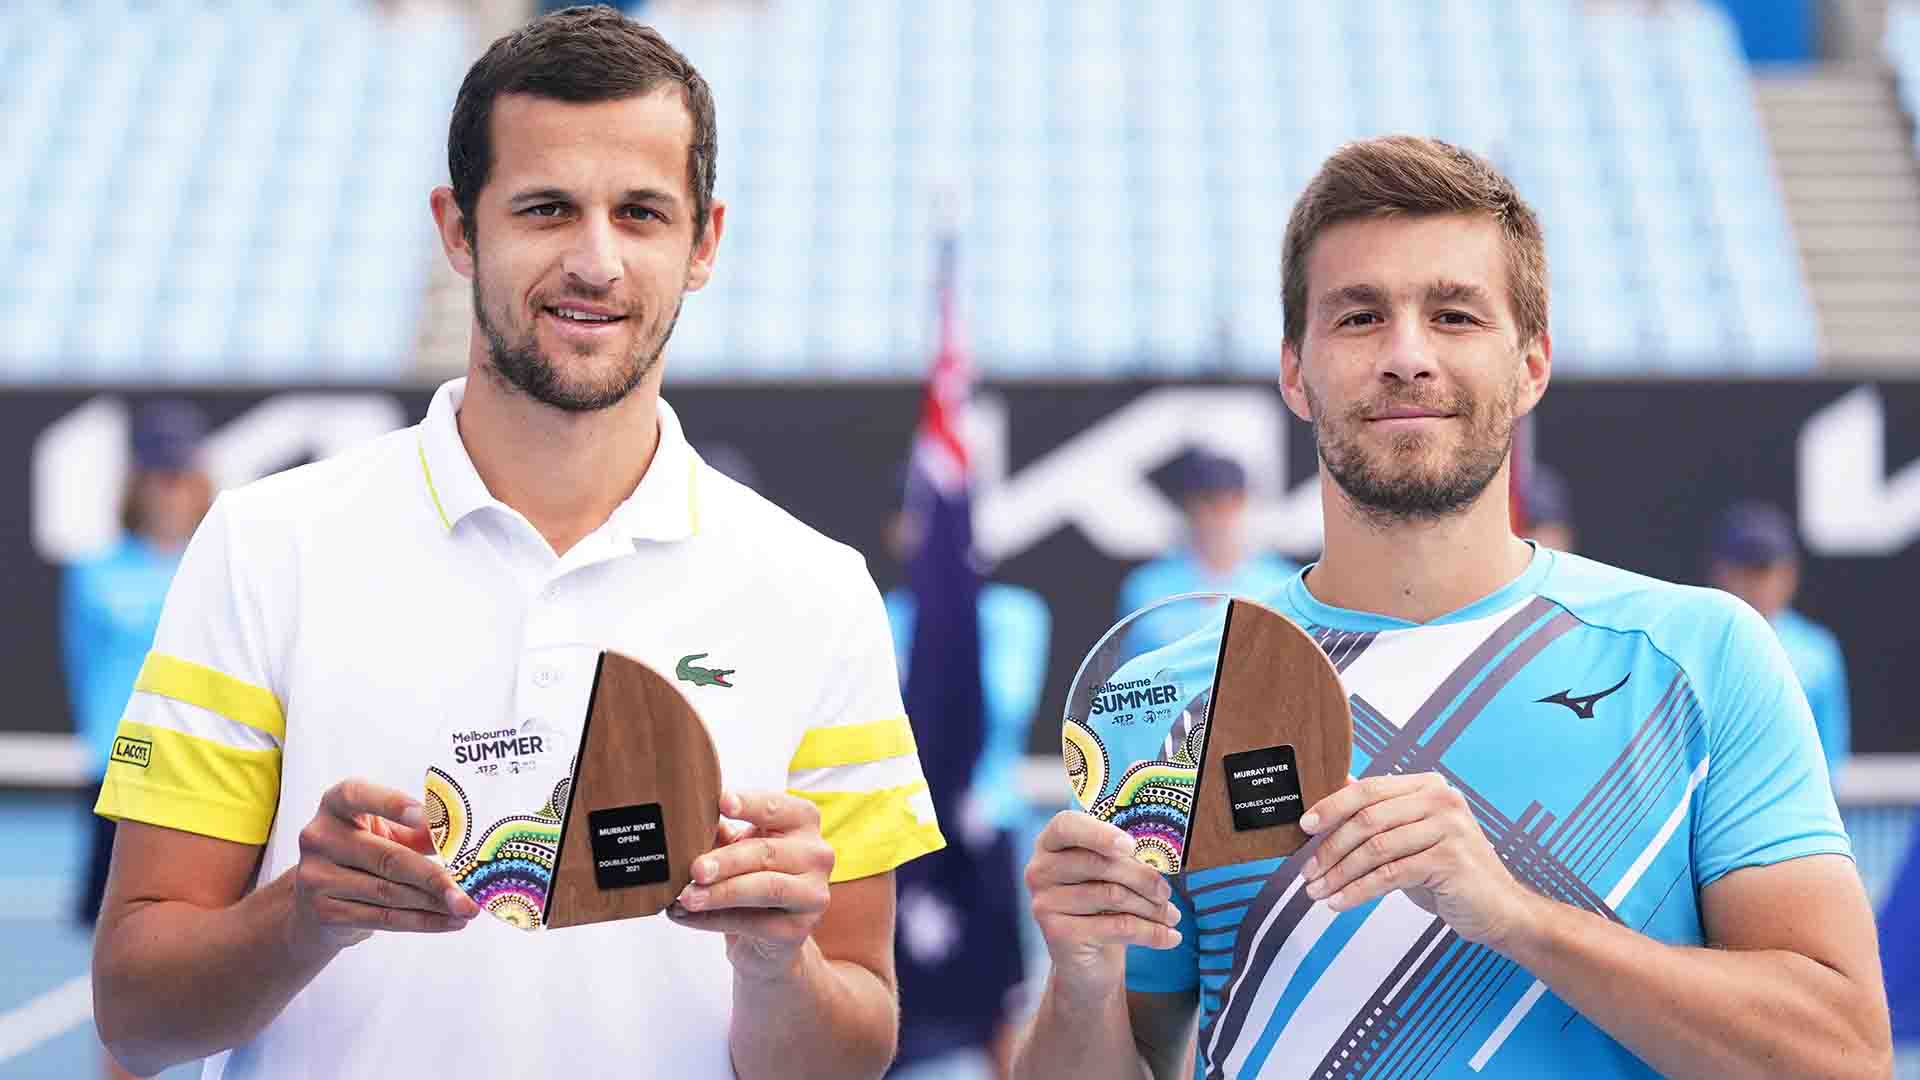 Nikola Mektic (right) and Mate Pavic (left) survived three Match Tie-breaks en route to the Murray River Open title.